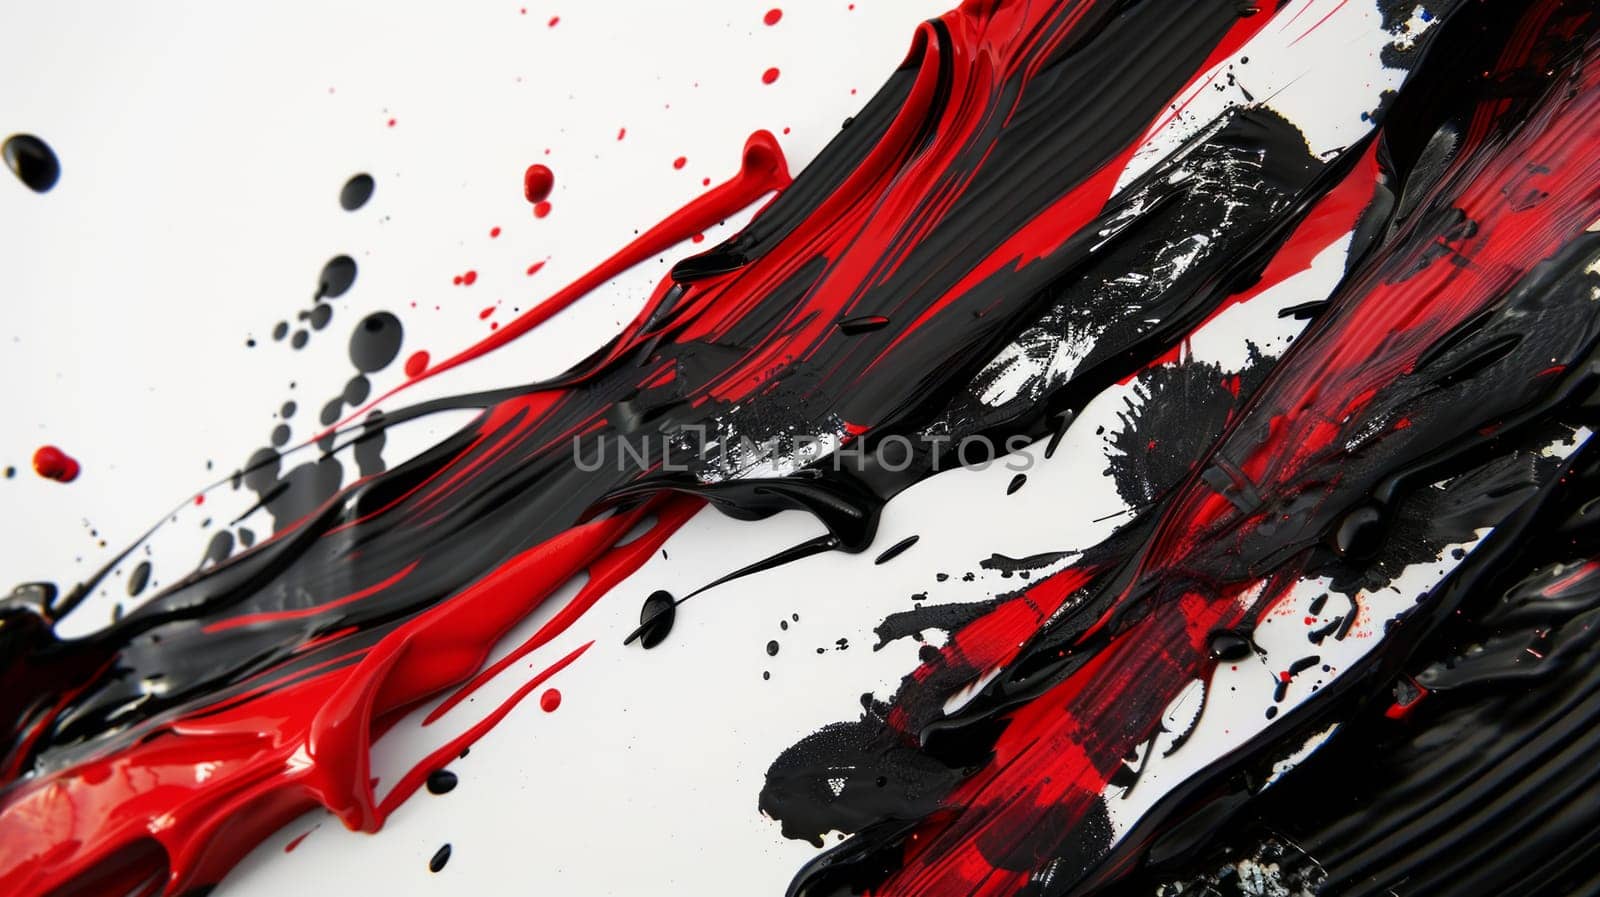 Vivid red and ebony black paint dance across a pristine white canvas in an artistically expressive explosion.